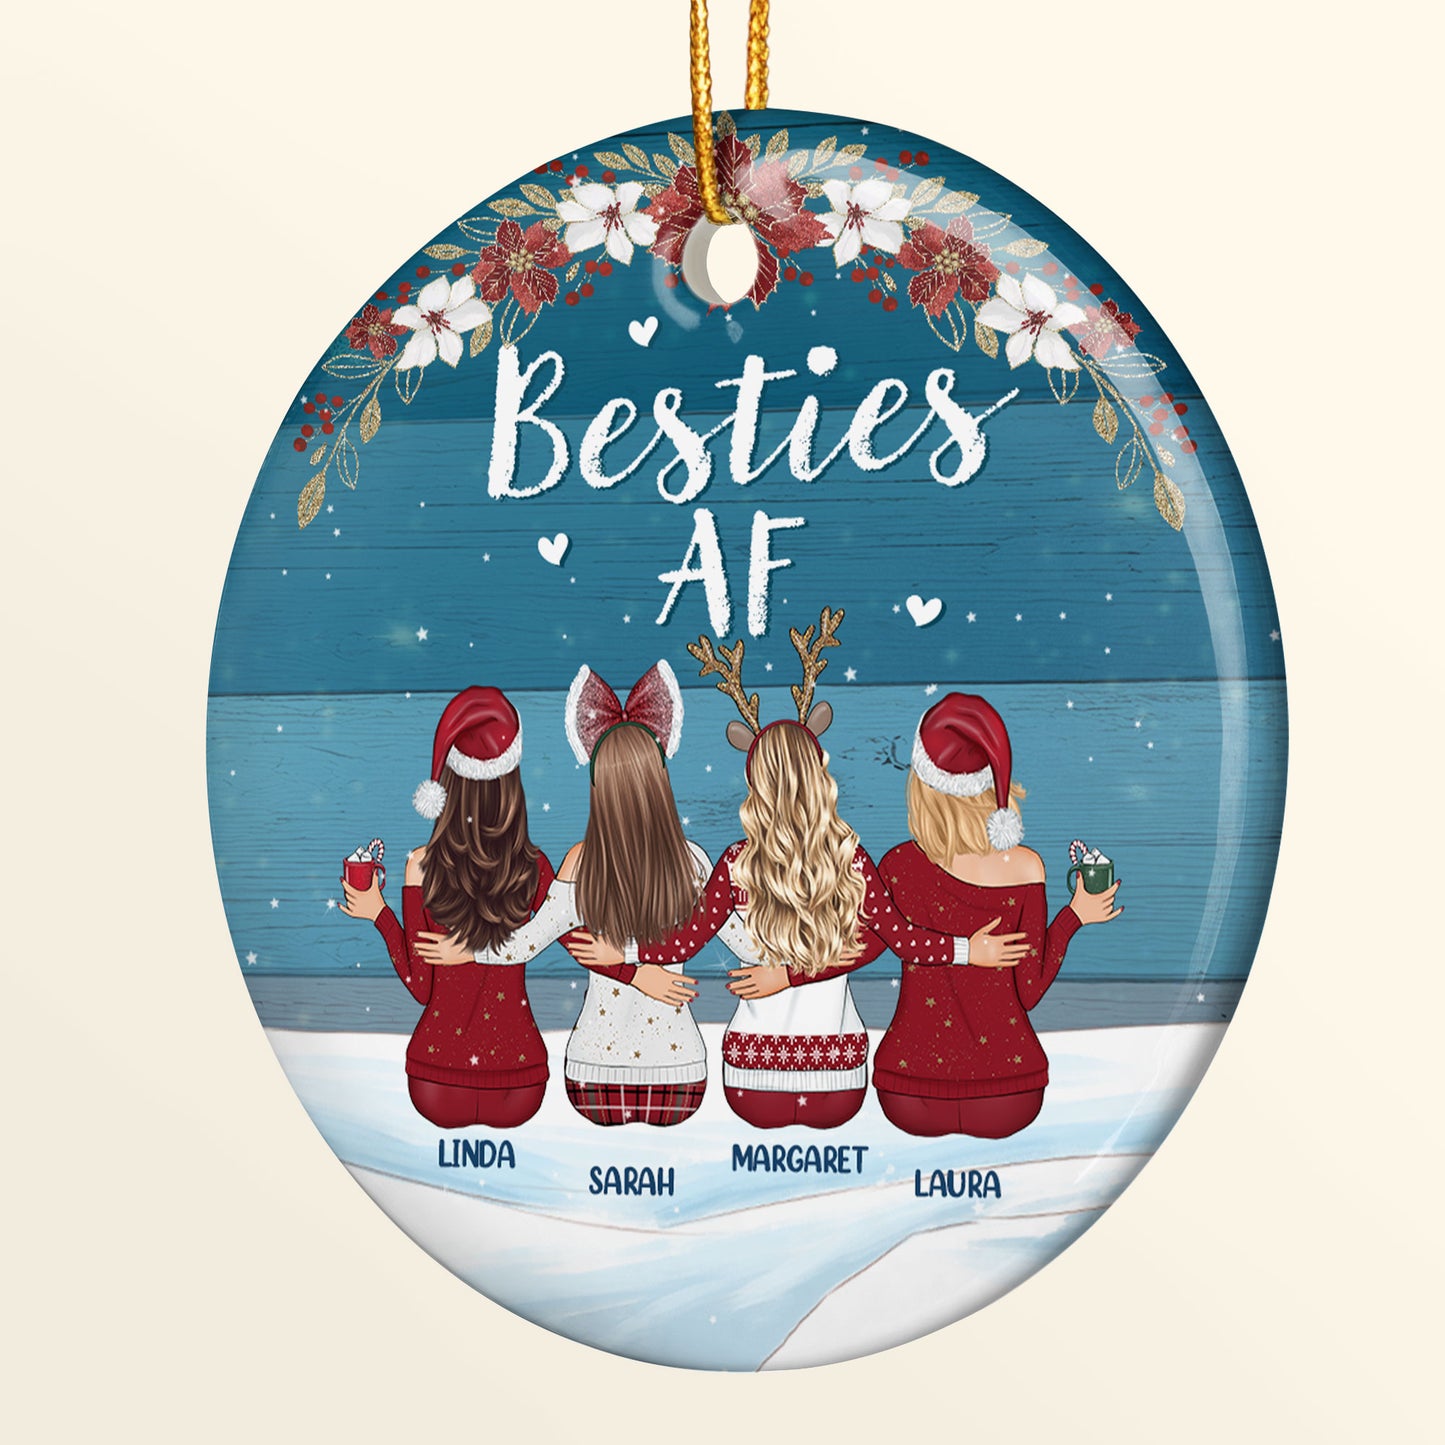 Besties AF - Personalized Ceramic Ornament - Christmas Gift For Best Friend